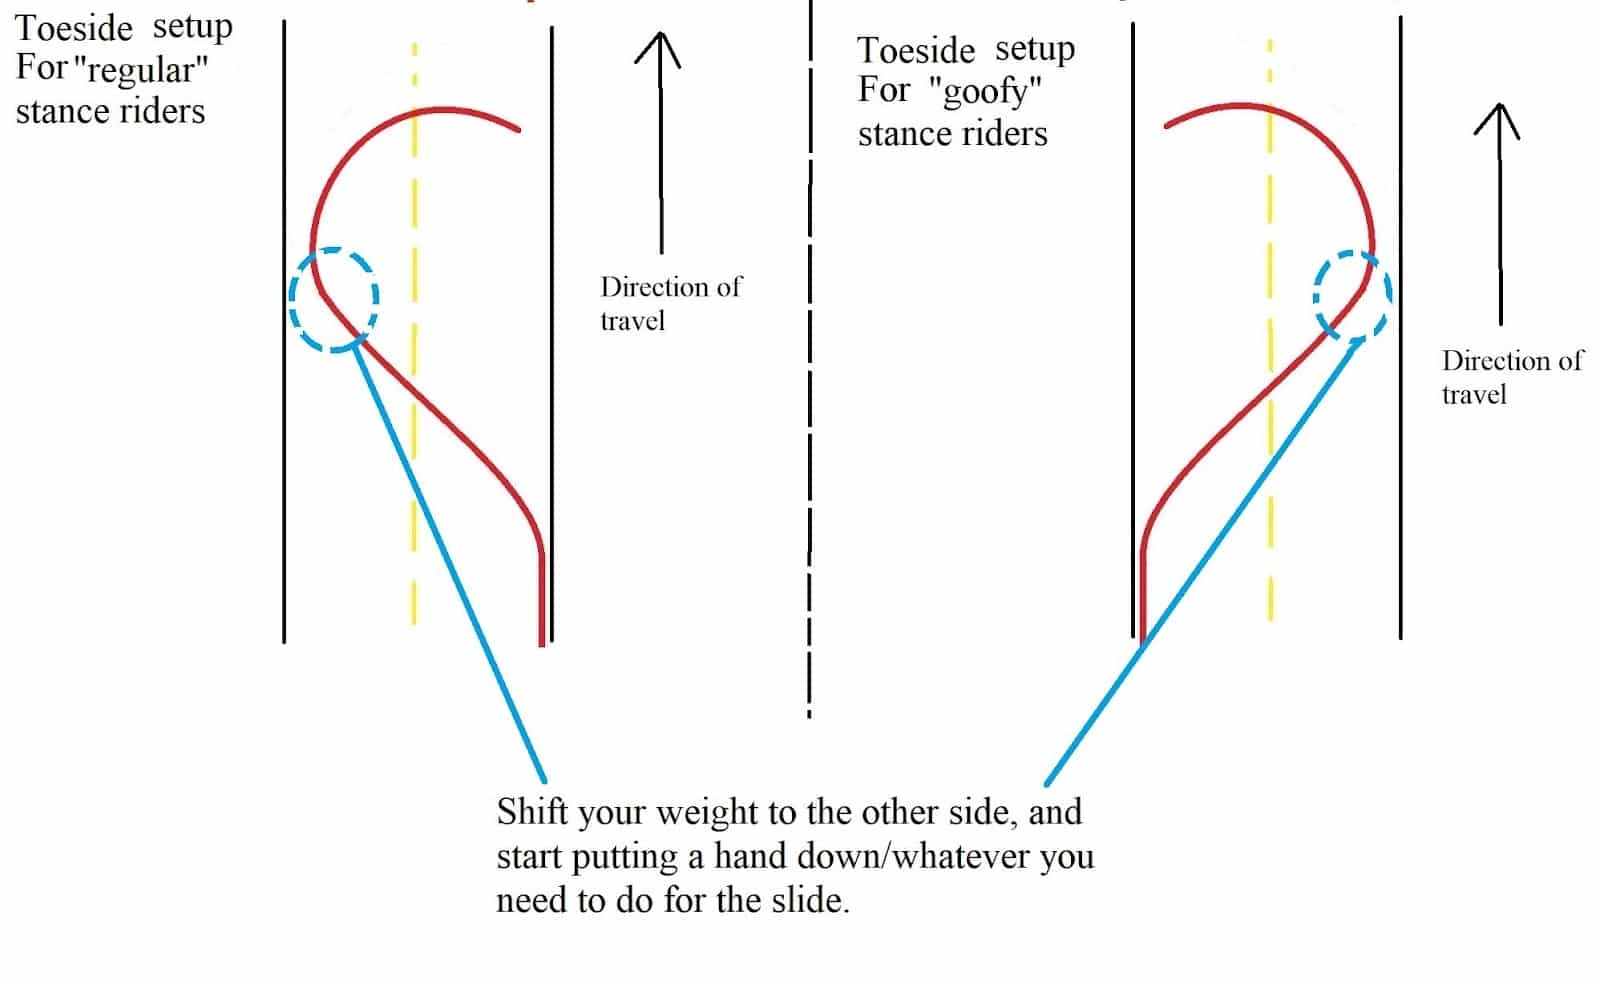 when to slide for the toeside check